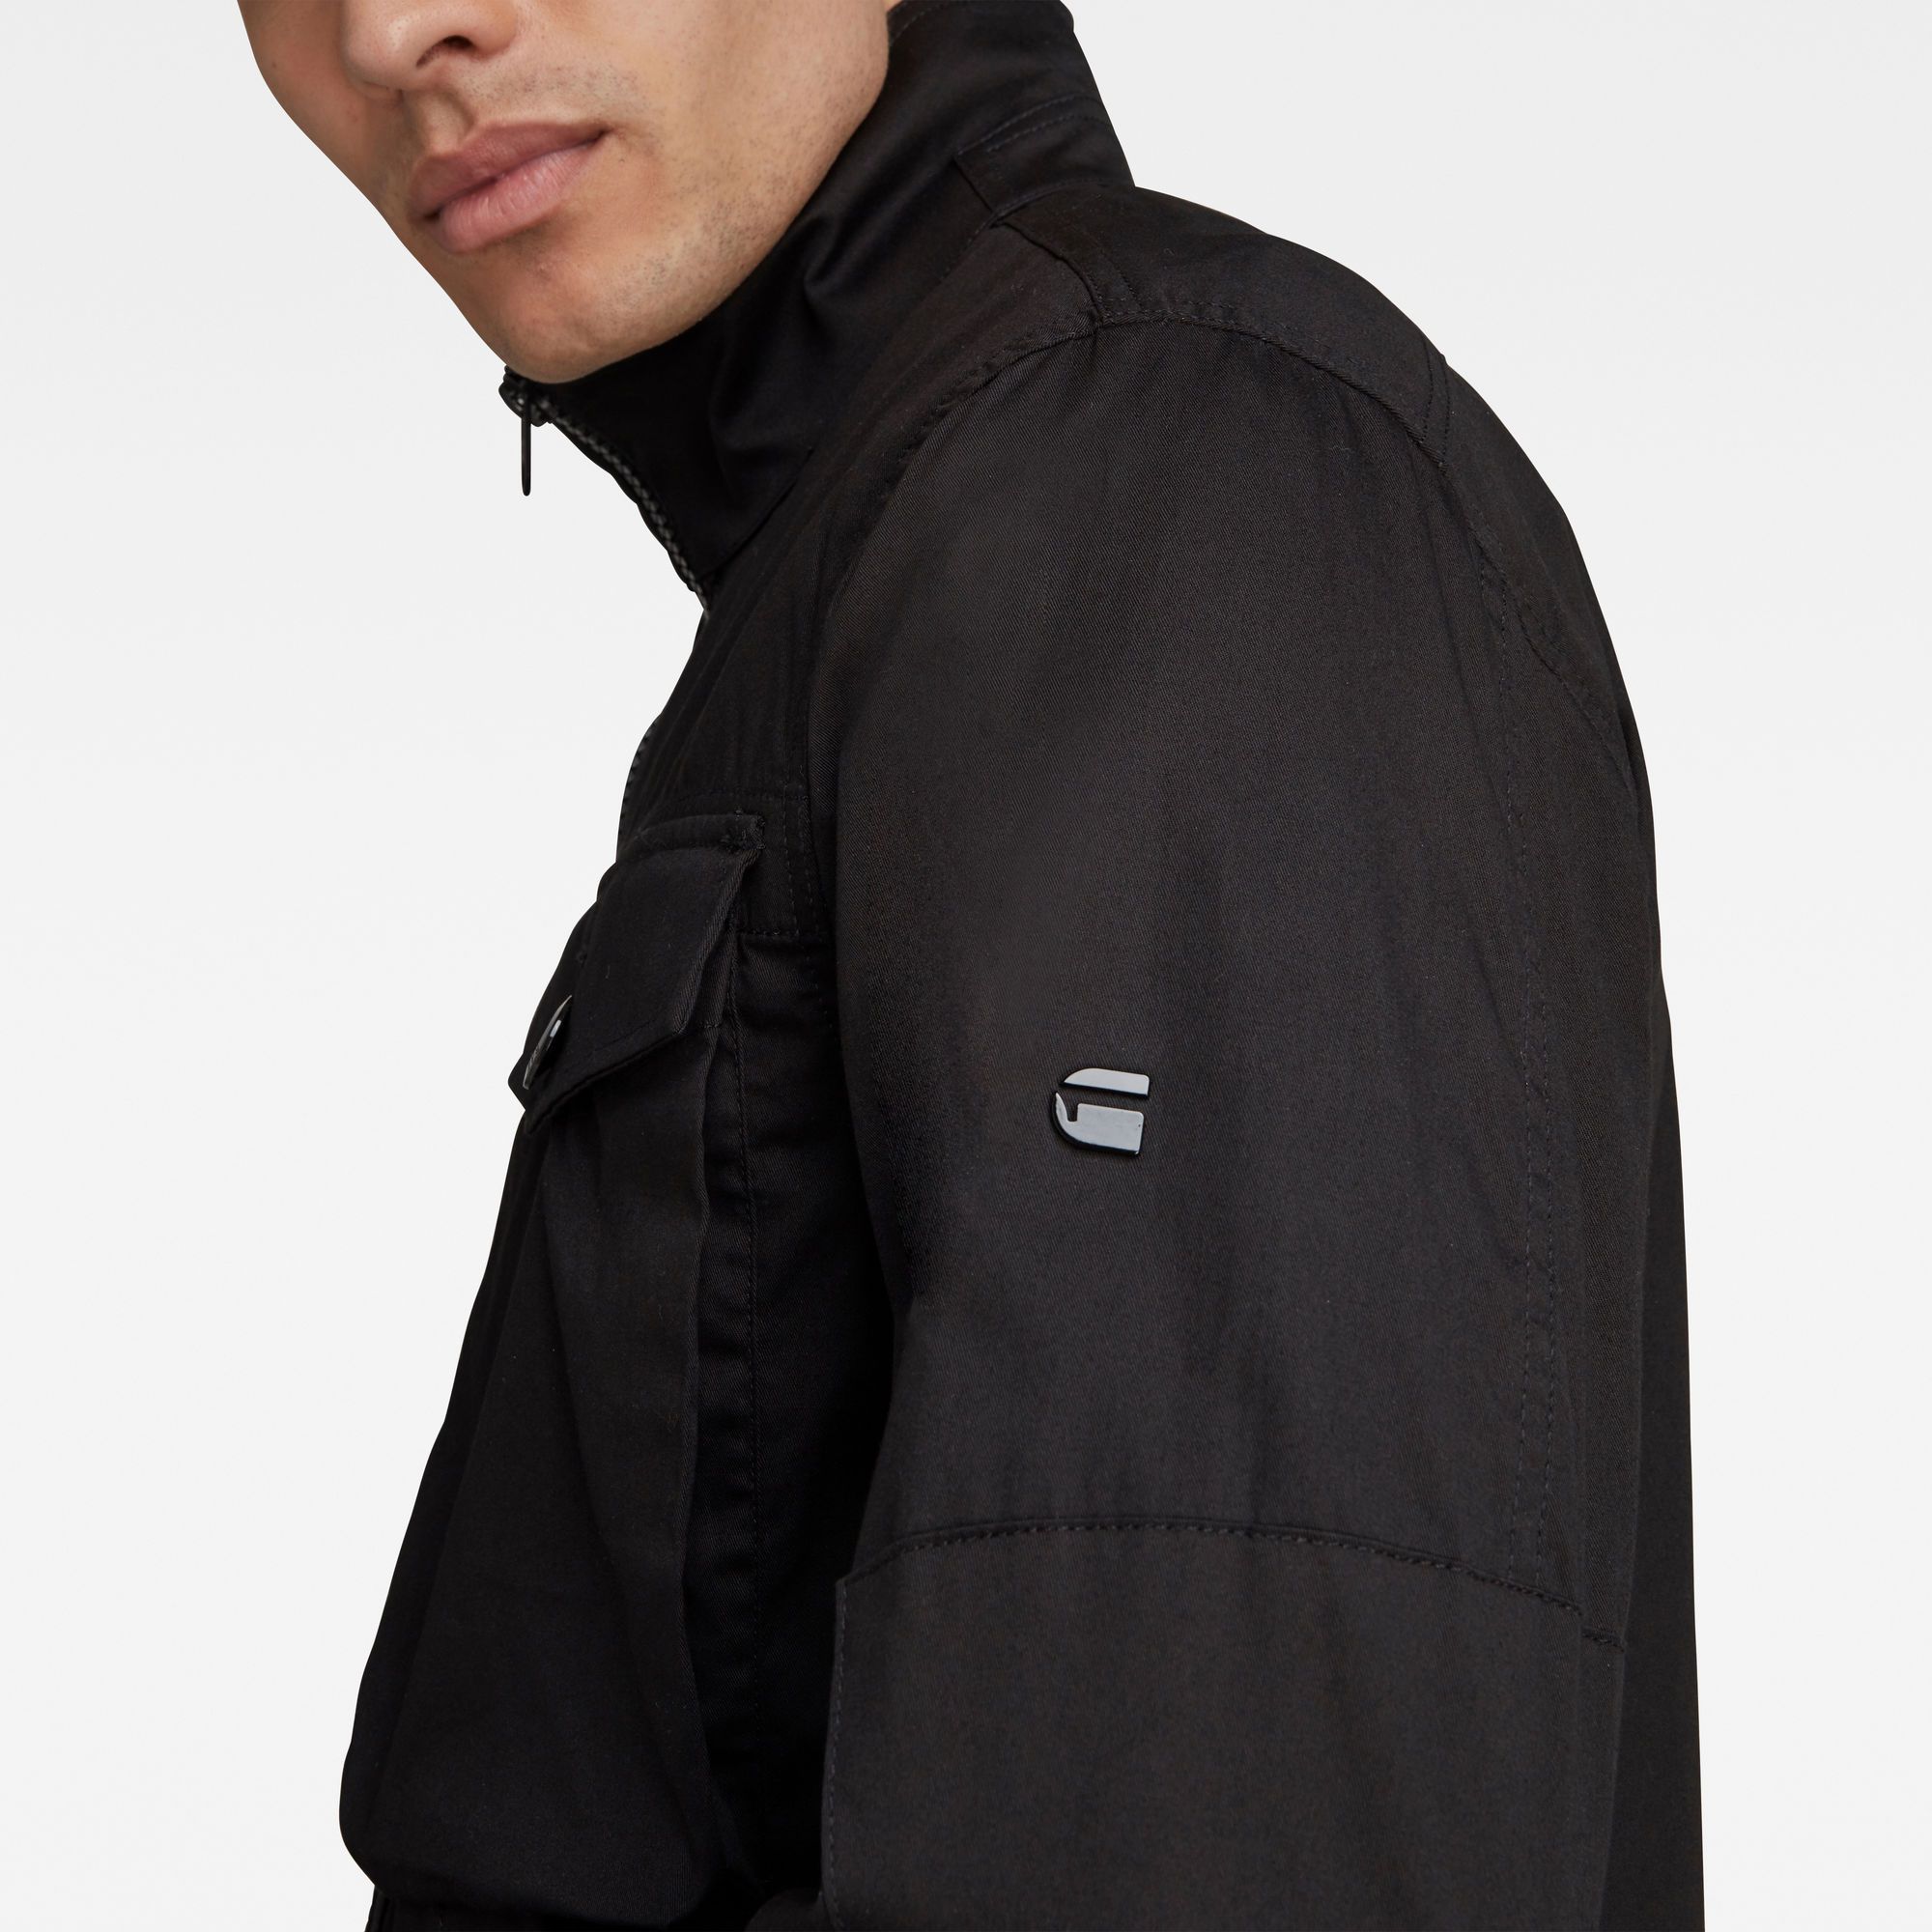 Straight fit. Standing collar. Zip and snap closures. Functional cuffs. Side seam pockets. Button front closure, Velcro closure at the top. Zip closure. The Type C Zip Utility Overshirt is crafted from longwearing twill fabric with a crisp look. With broad bellow pockets and a long fit, this functional shirt is a fresh take on a workwear staple. A contrast zip-closure adds extra interest to the front. While the straight fit gives a strong, contemporary silhouette. Reinforced elbows deliver strength where you need it. Fine twill lines